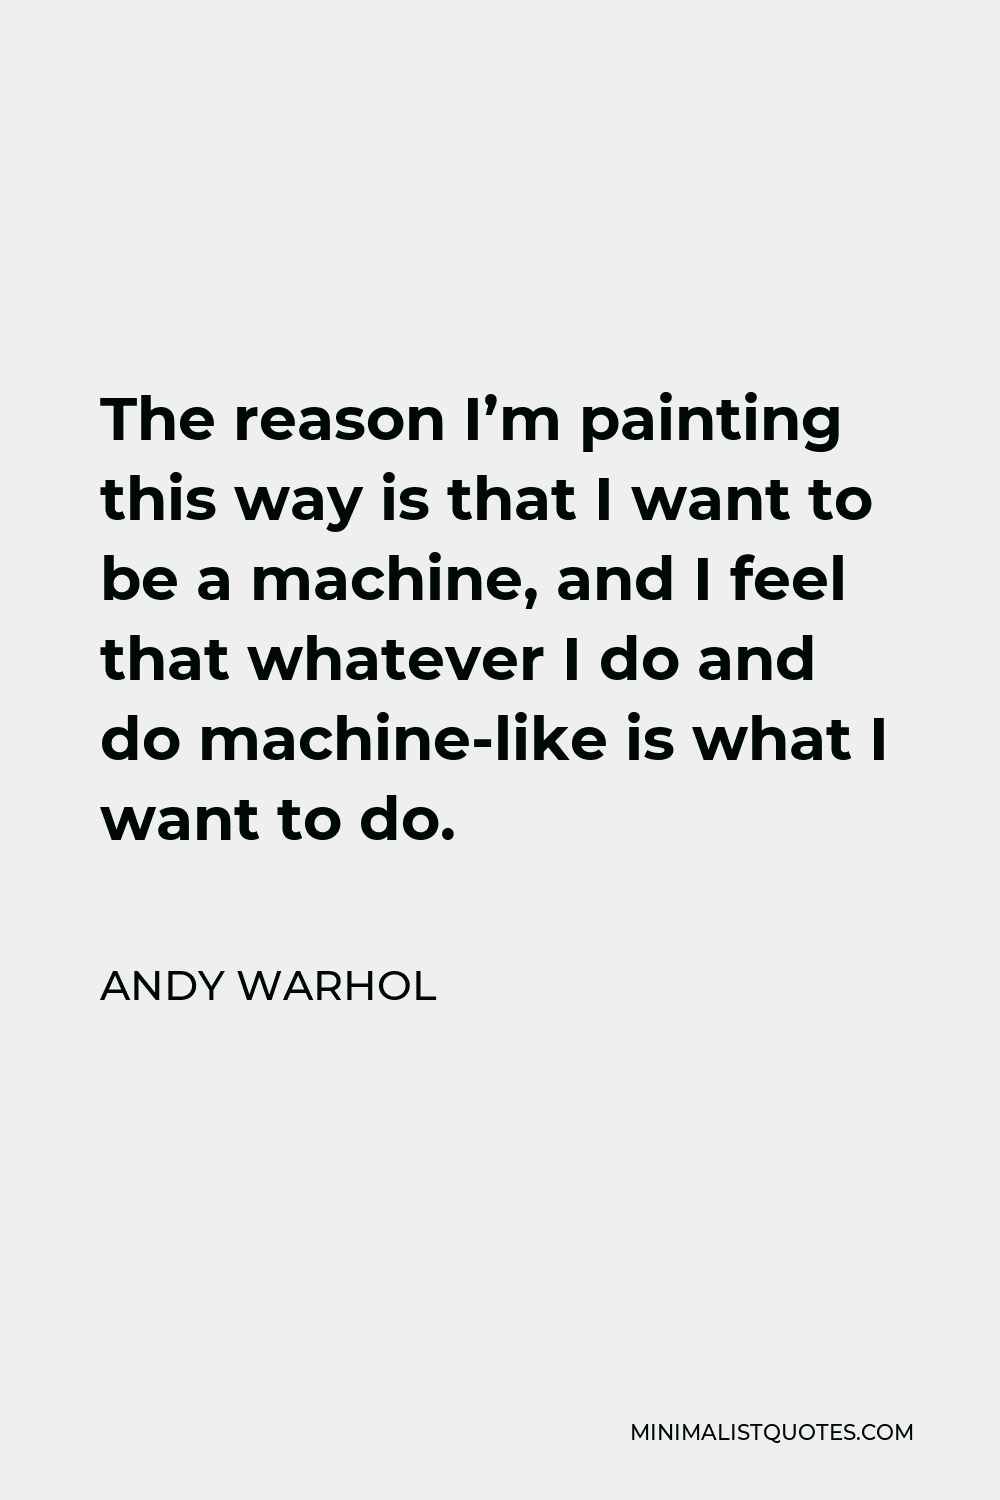 Andy Warhol Quote - The reason I’m painting this way is that I want to be a machine, and I feel that whatever I do and do machine-like is what I want to do.